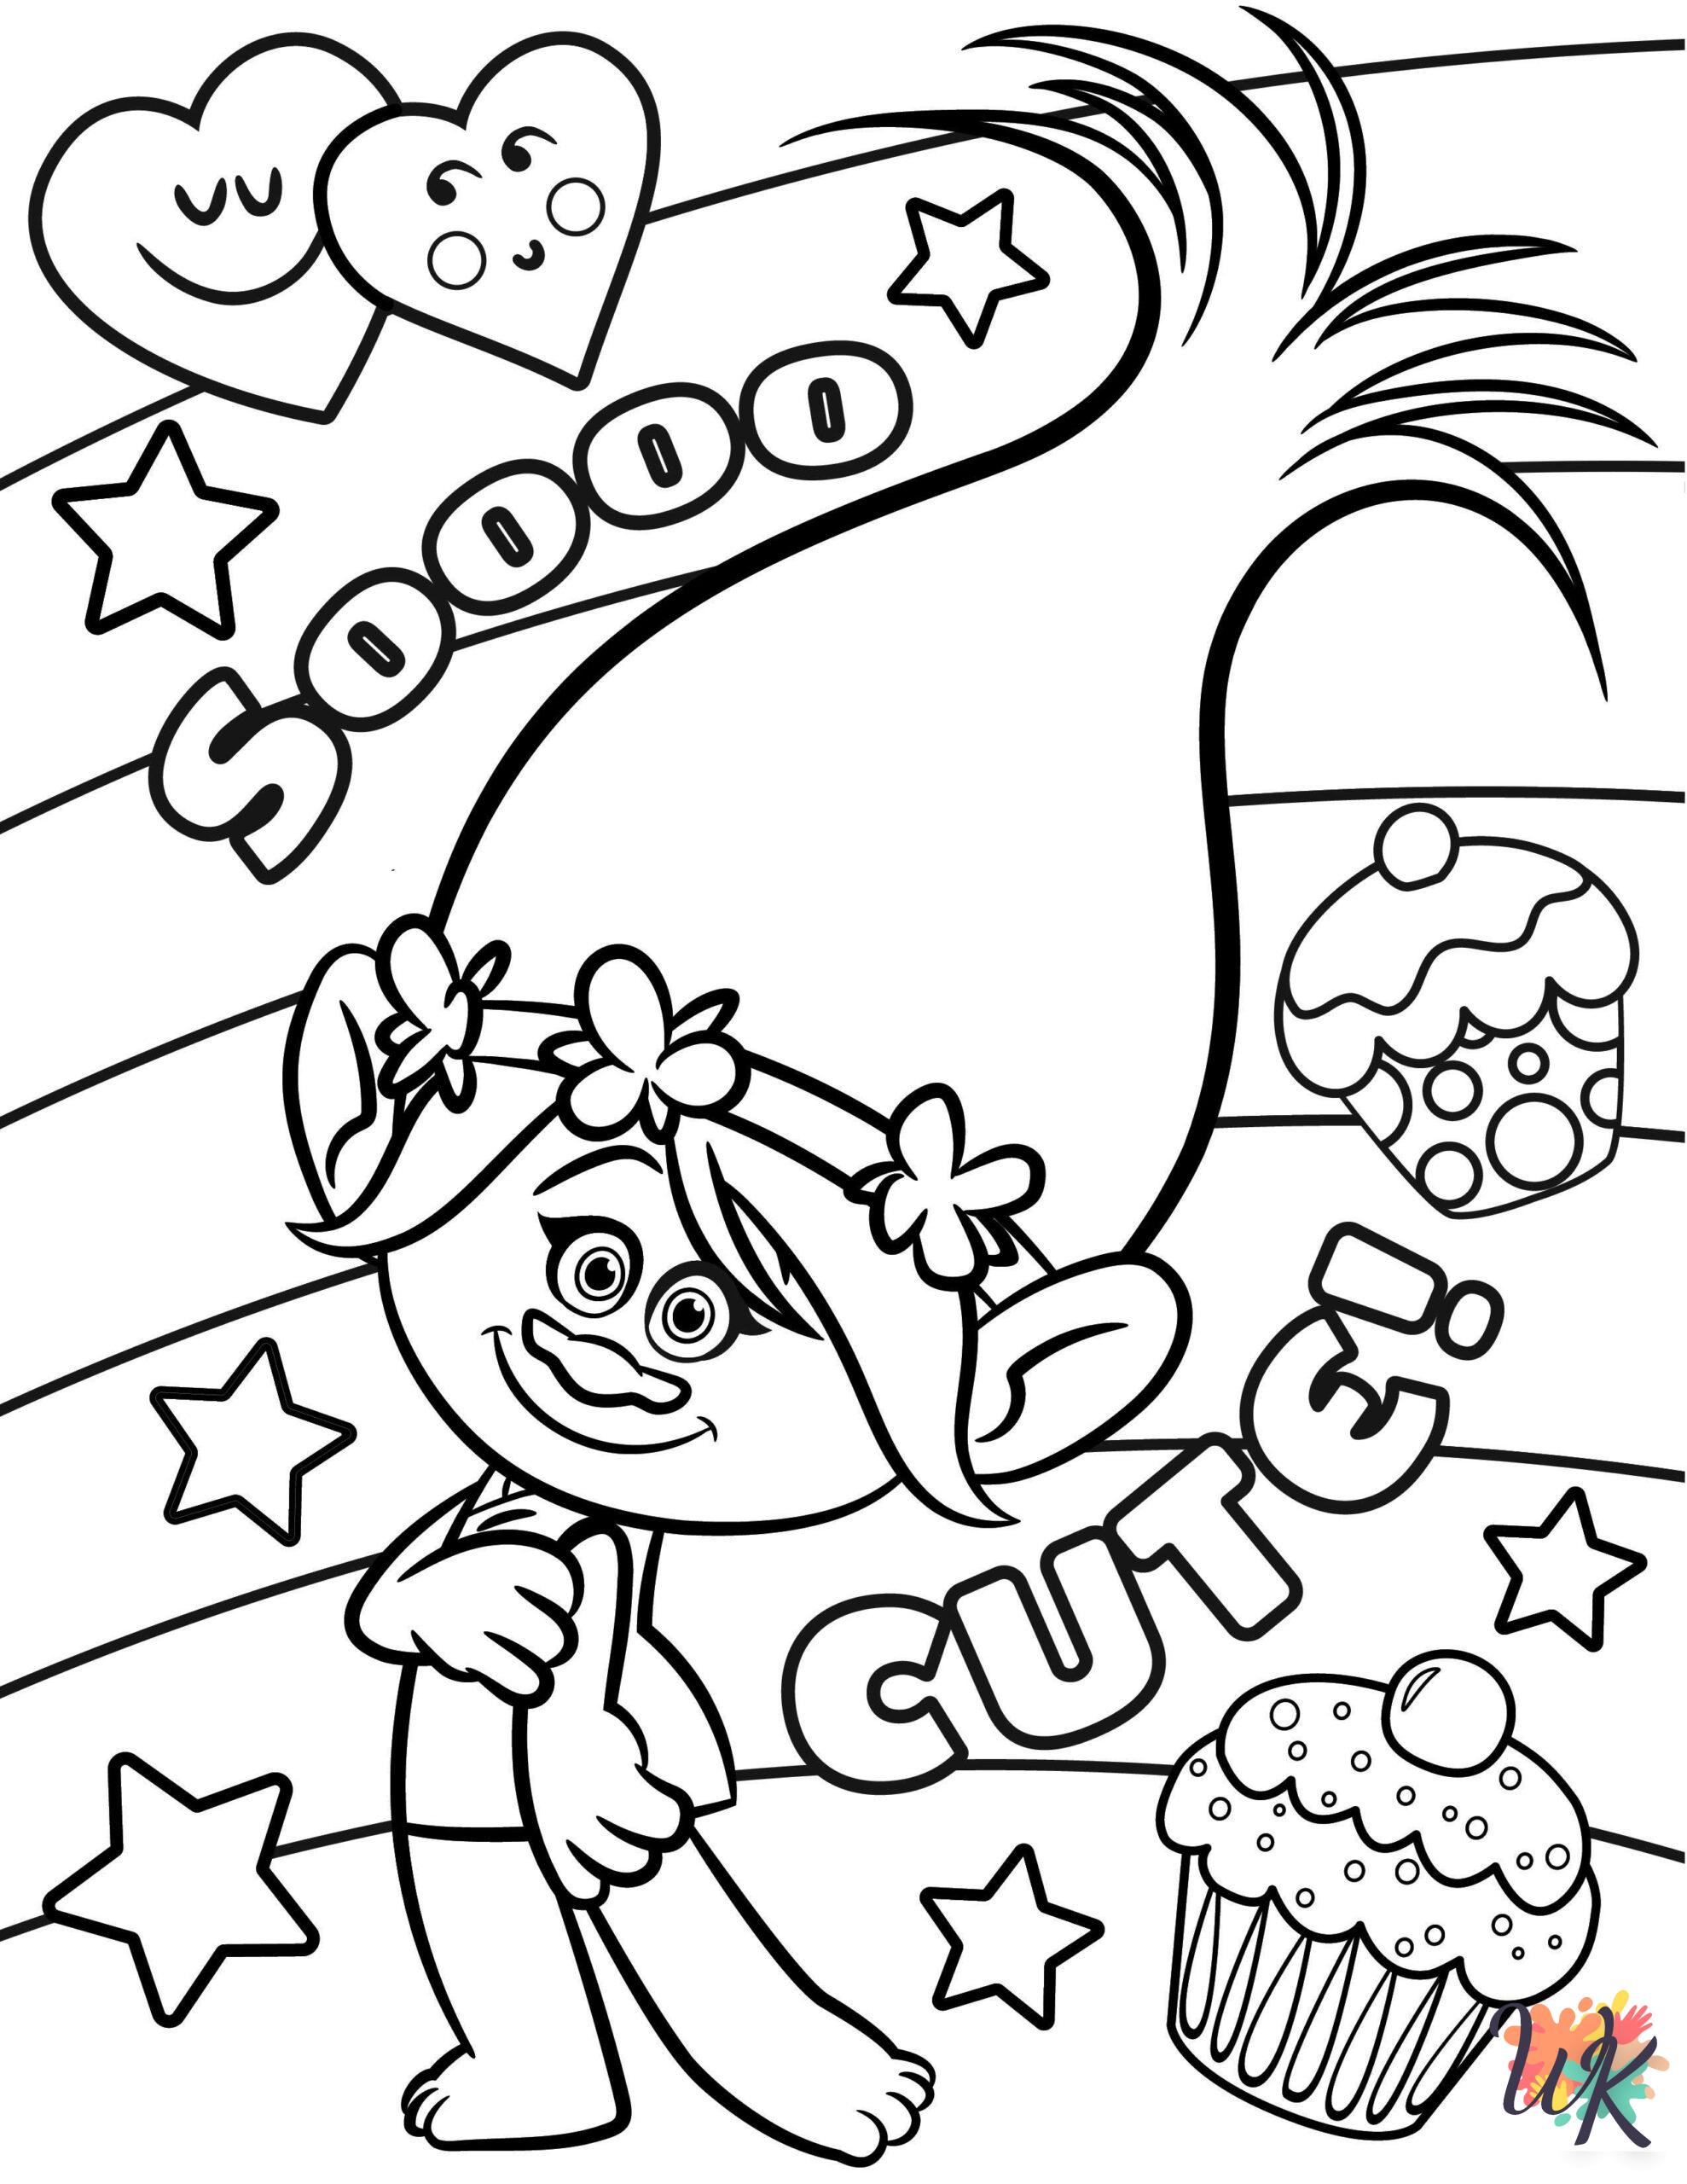 Trolls coloring pages grinch